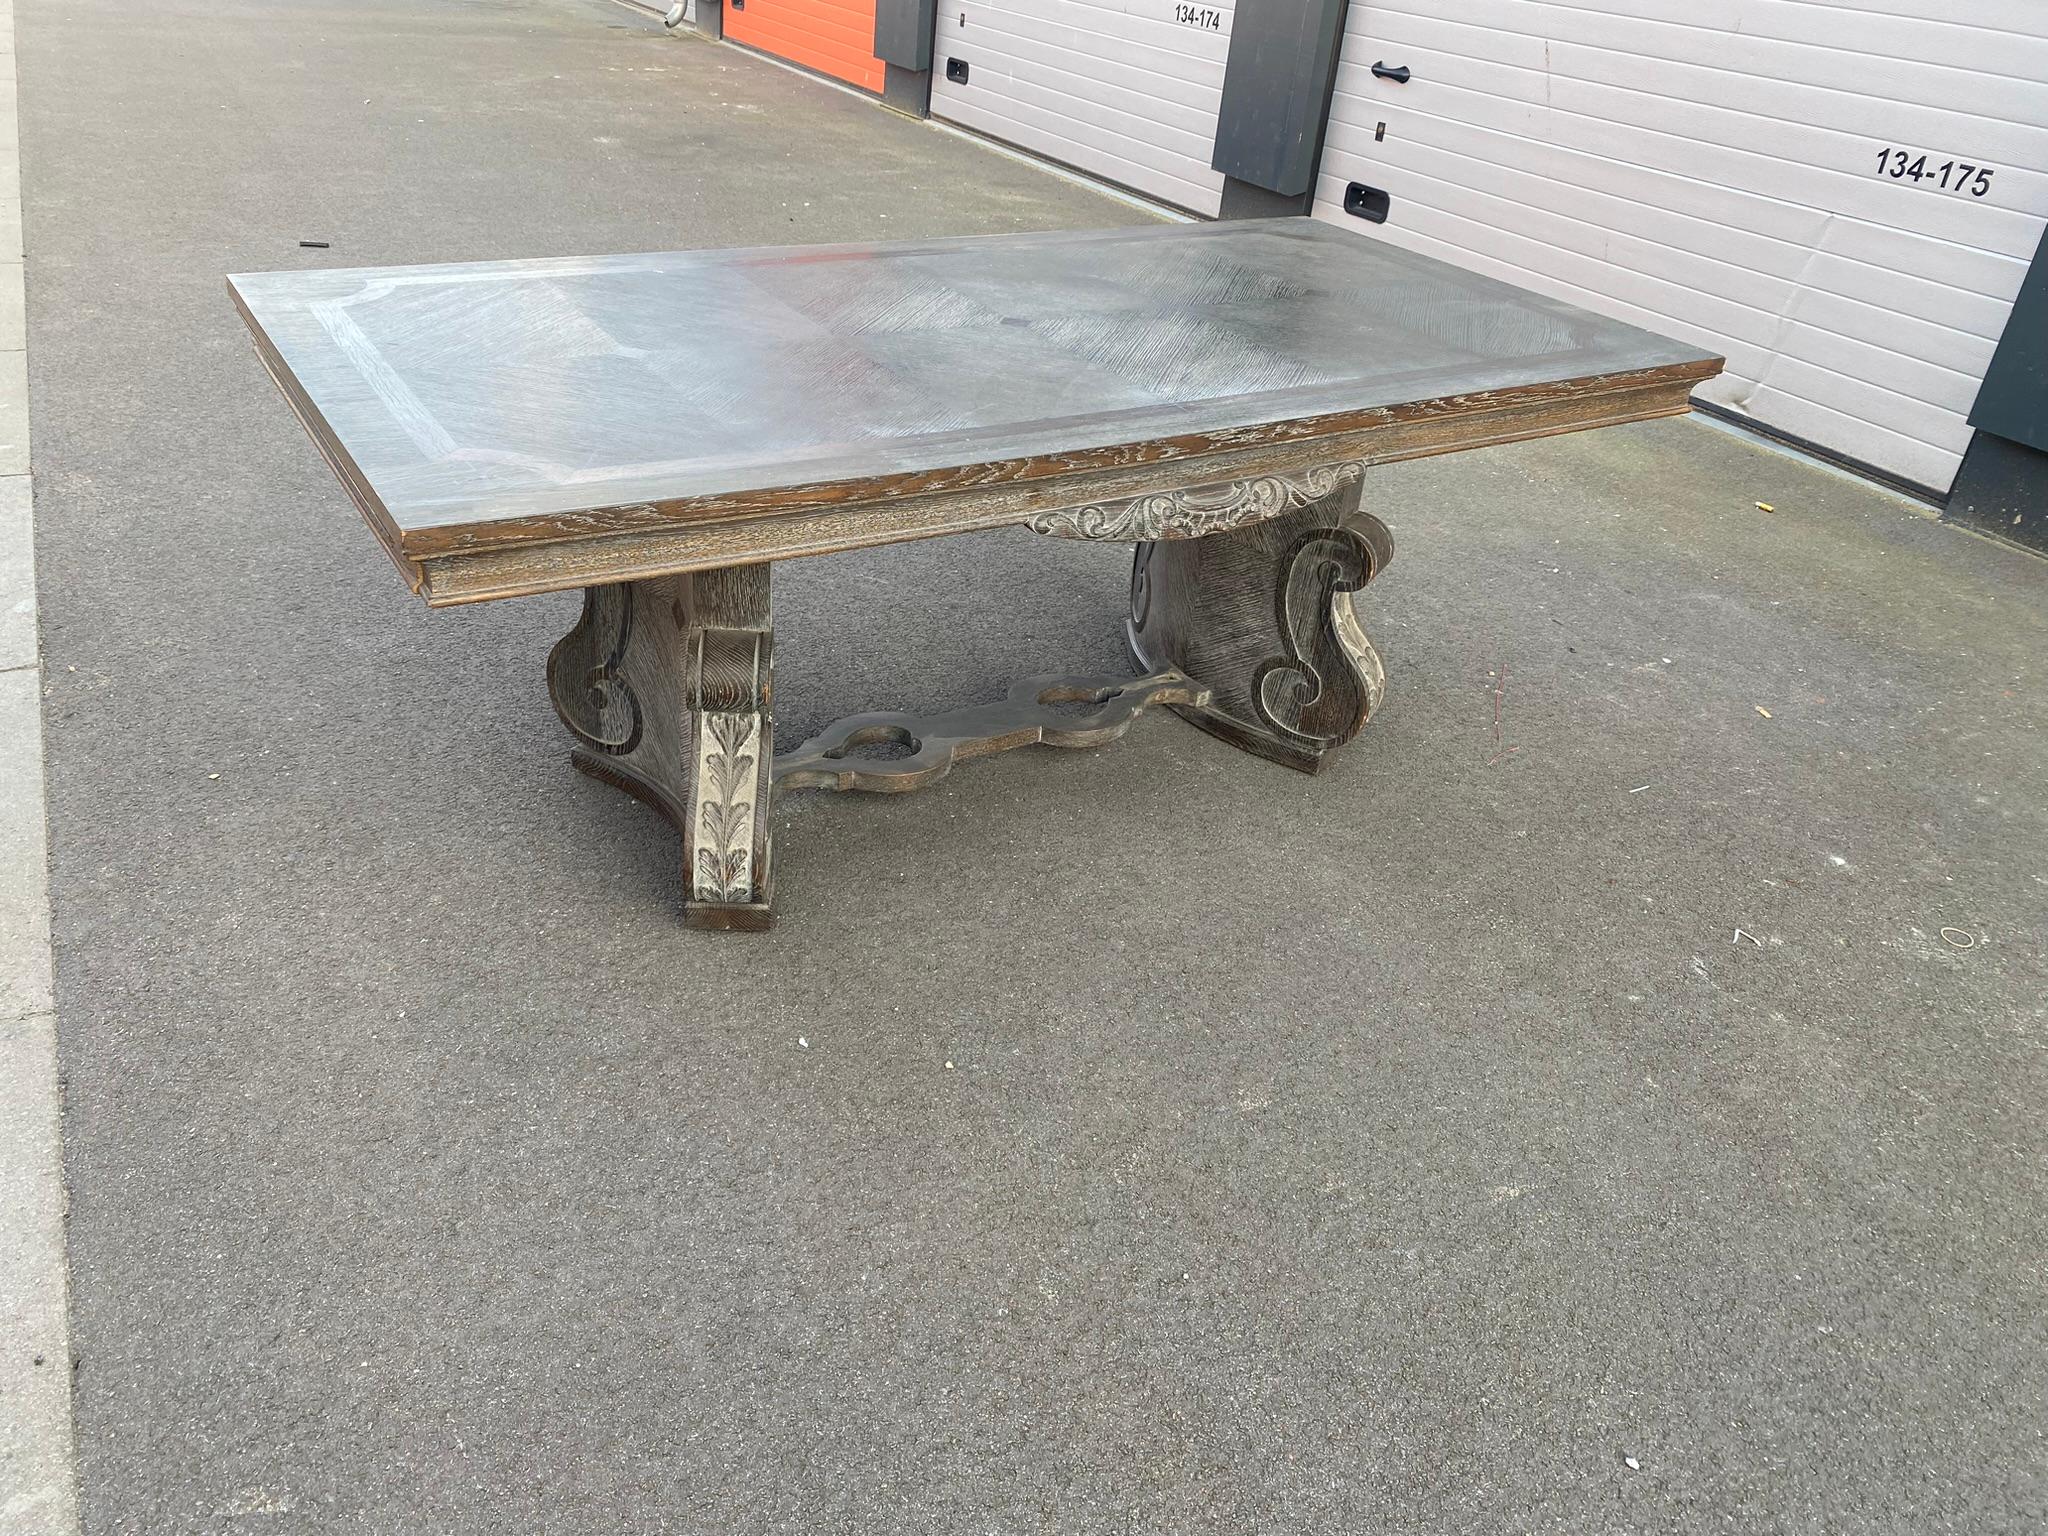 Blackened oak art deco table circa 1940/1950
Small gaps on the base
Patina to redo
2 Extensions
The patina of the extensions has remained in very good condition and gives an idea of the appearance of the restored table.
The top is inlaid with